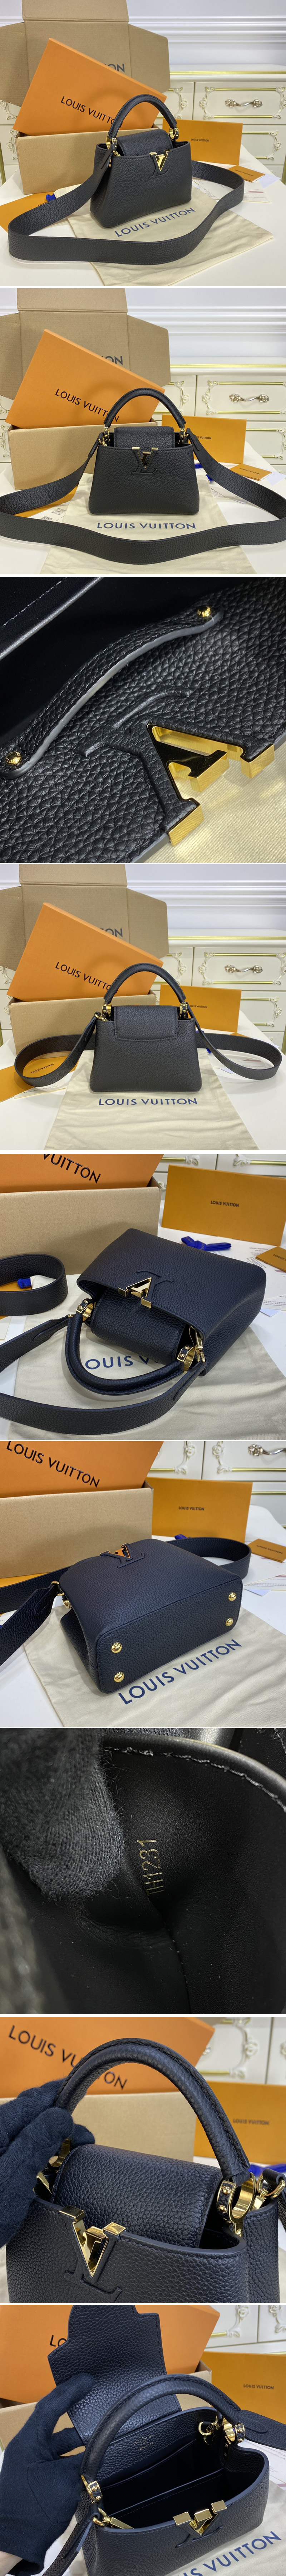 Louis Vuitton MP2682 LV Chain Links Patches necklace in Multicolored  Replica sale online ,buy fake bag